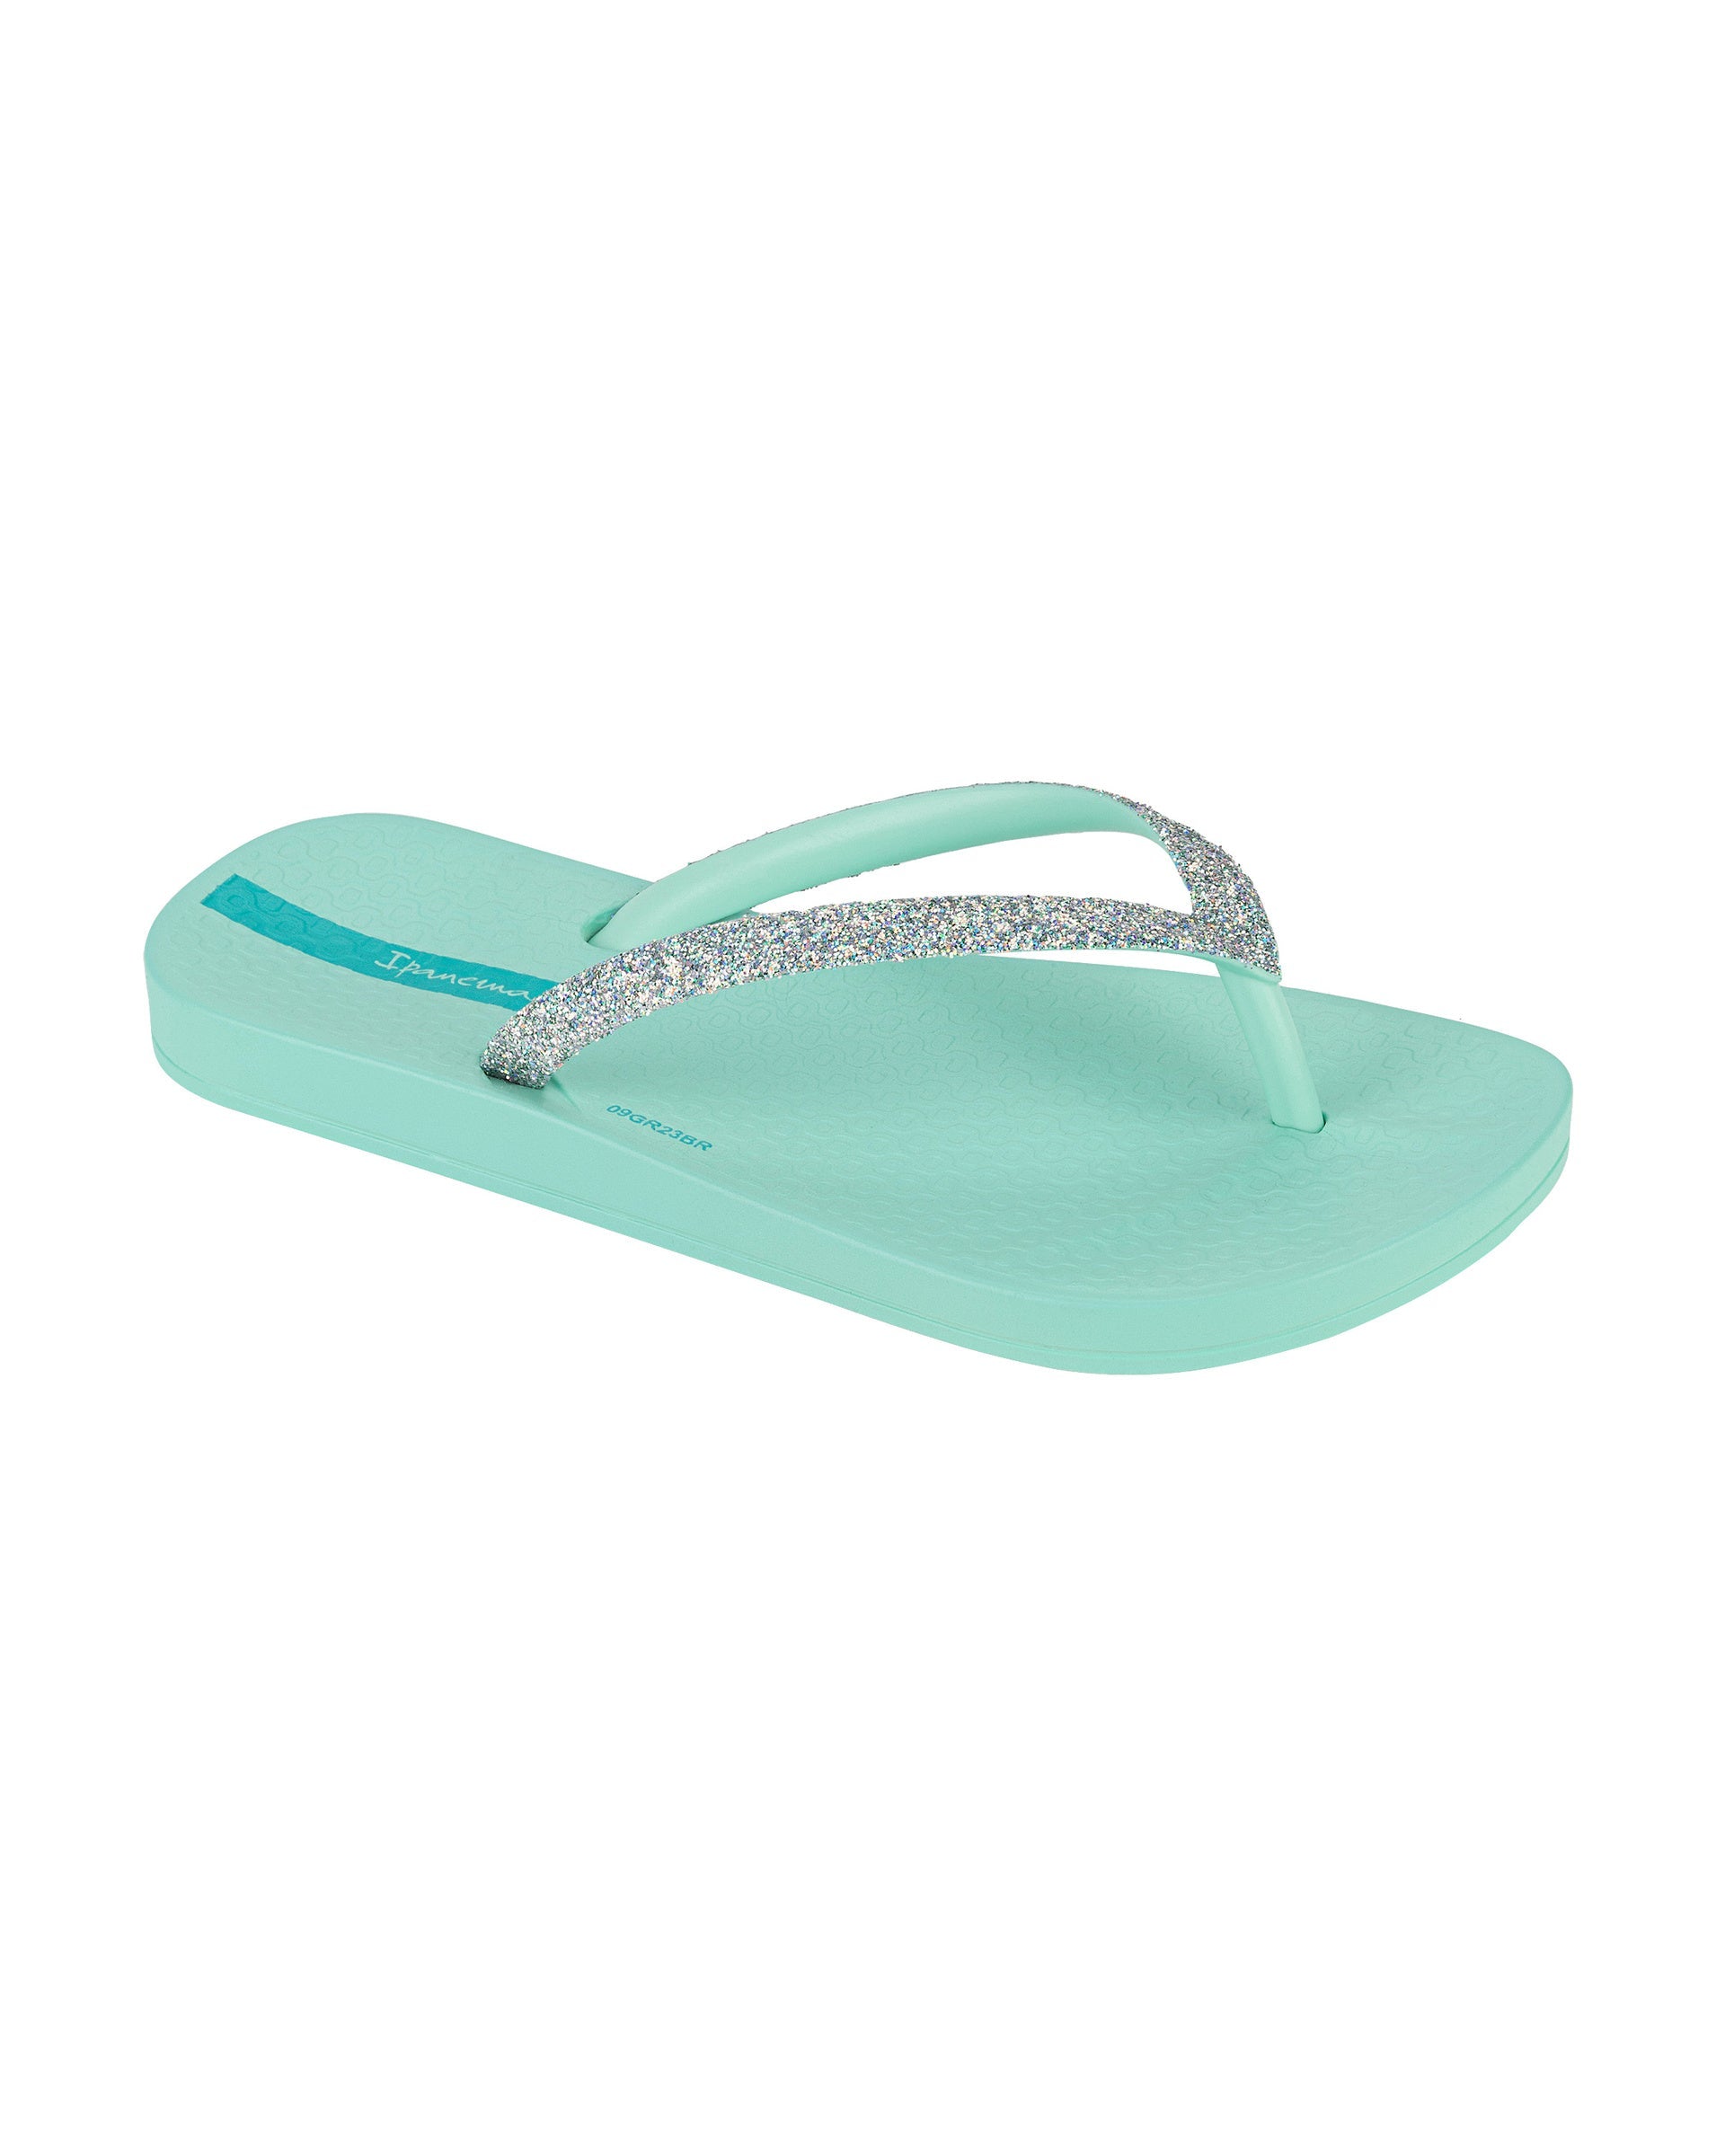 Angled view of a green Ipanema Ana Sparkle kids flip flop with silver glitter strap.